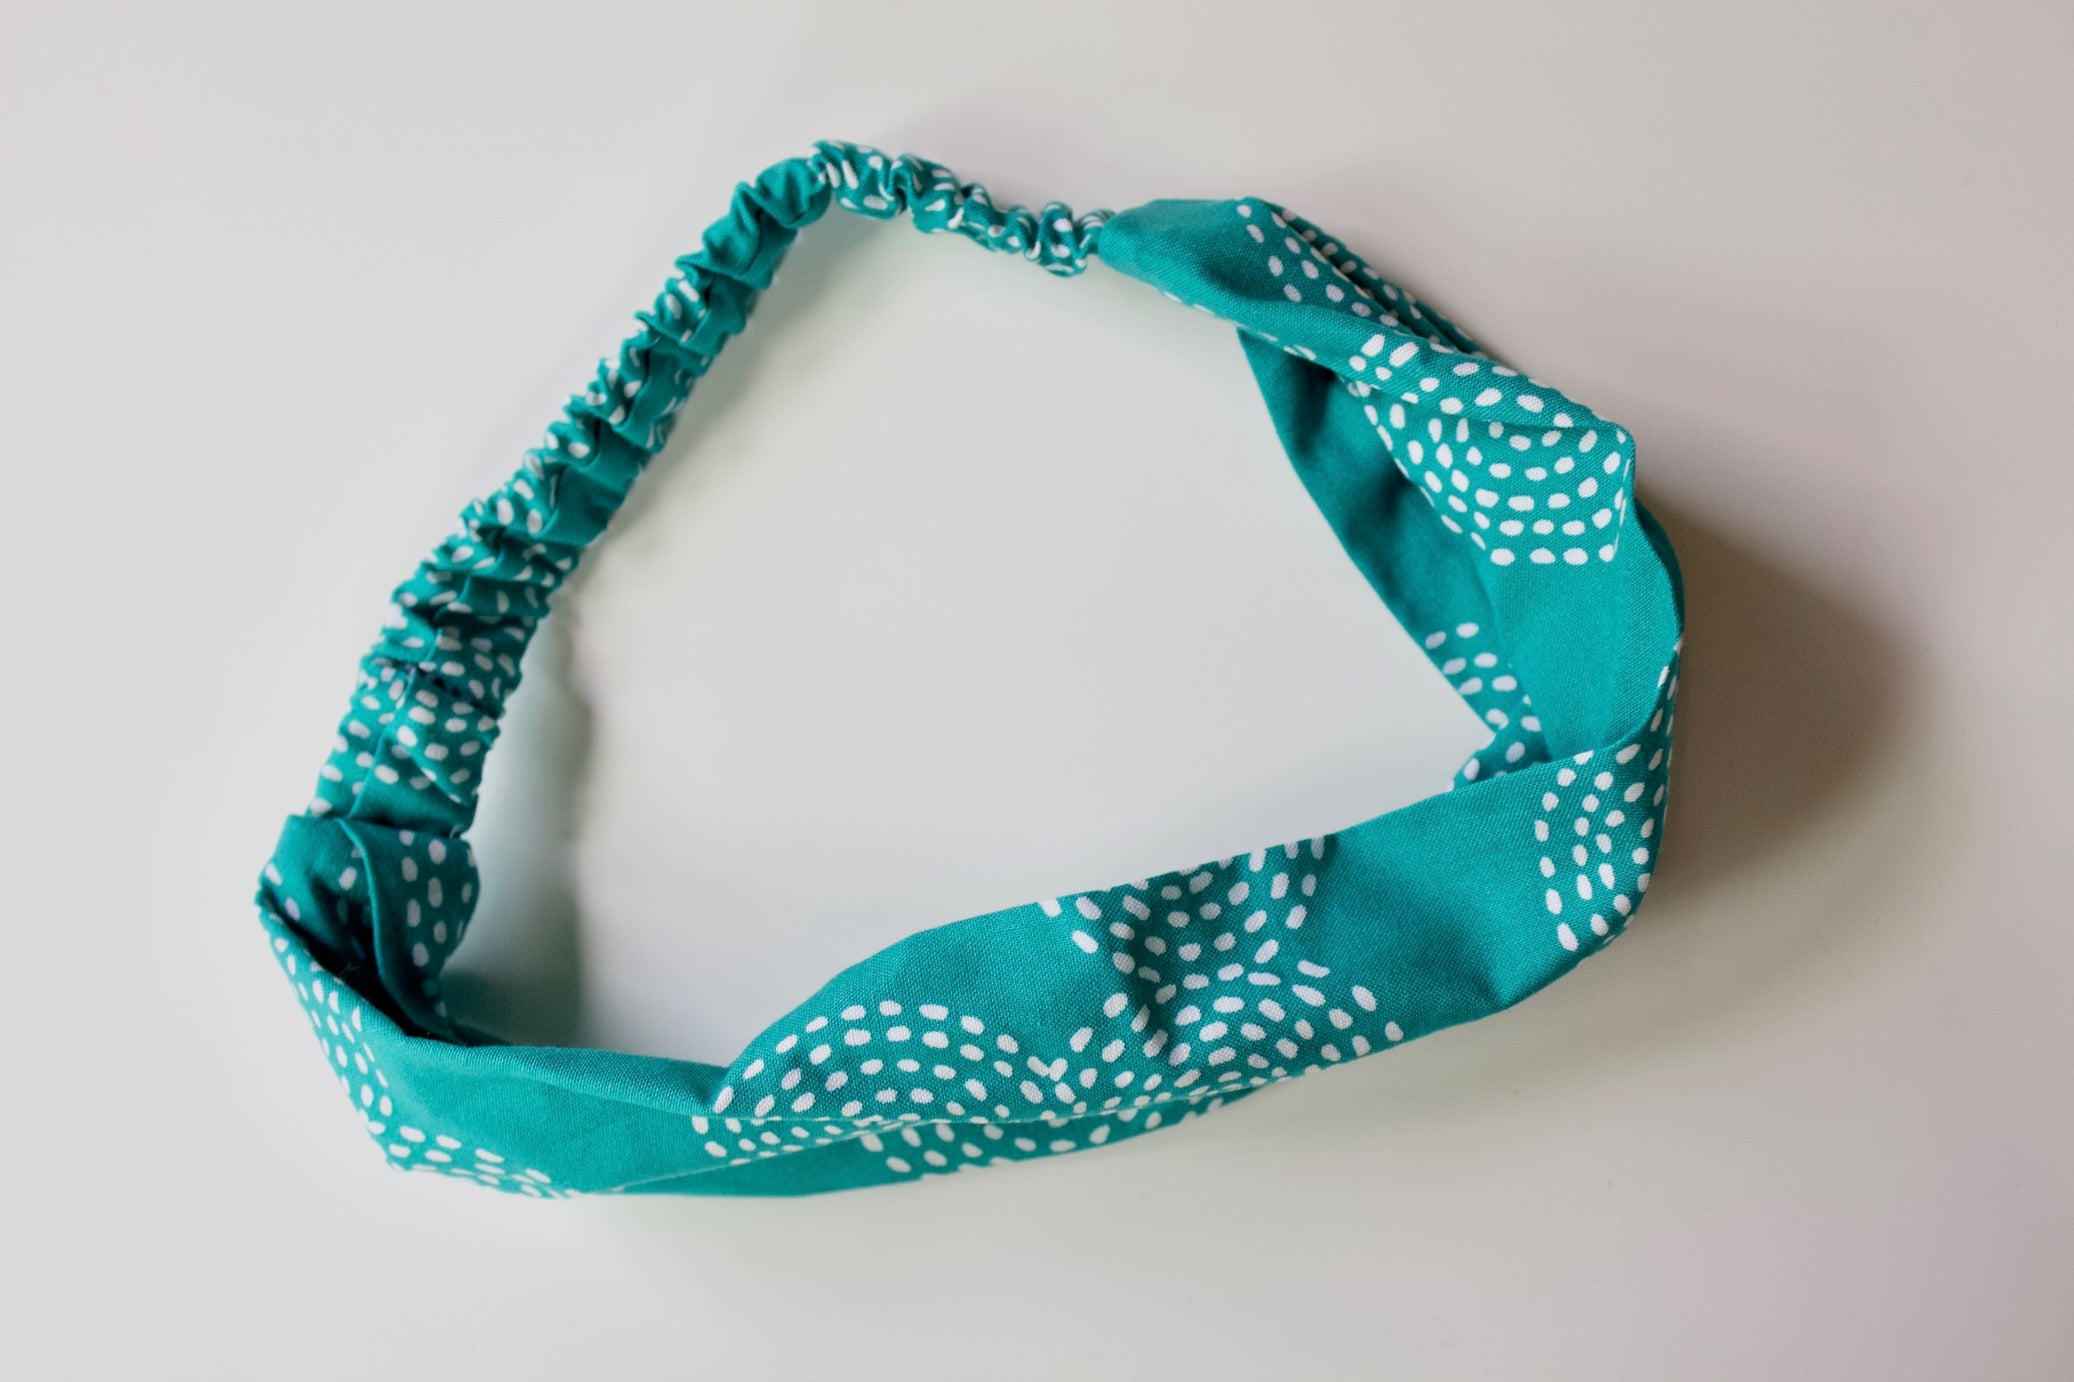 Teal Circles Headband-The Blue Peony-Category_Headband,Color_Teal,Color_White,Department_Personal Accessory,Style_Straight